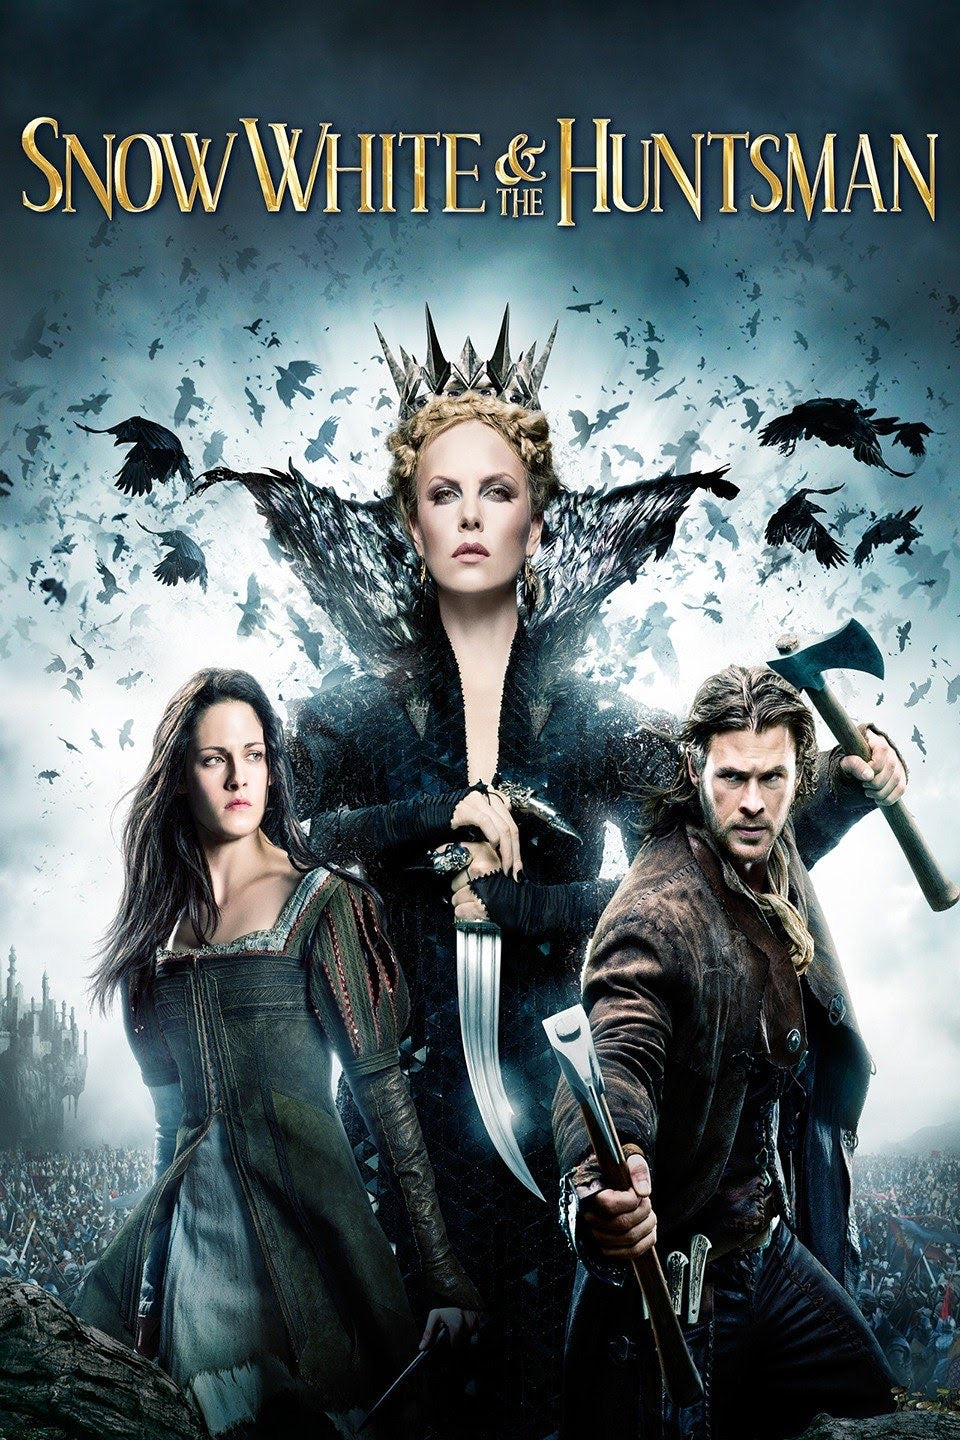 Snow White And The Huntsman (2012) [Extended Edition] Vudu or Movies Anywhere HD redemption only